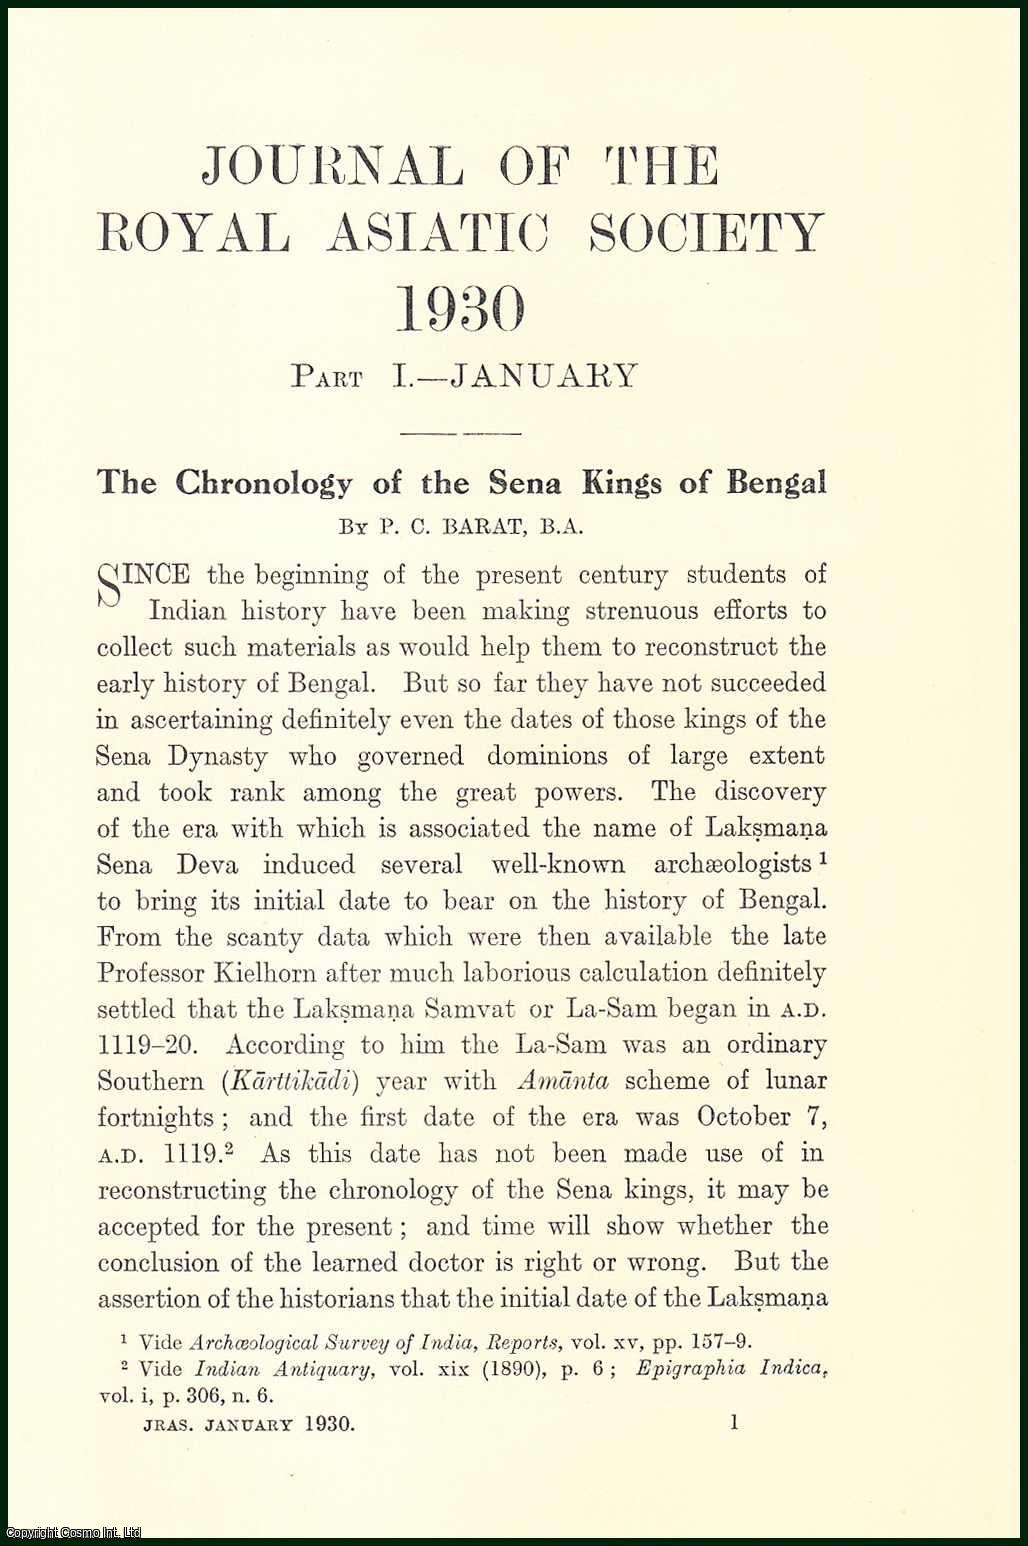 P.C. Barat - The Chronology of The Sena Kings of Bengal. An uncommon original article from the Royal Asiatic Society , 1930.